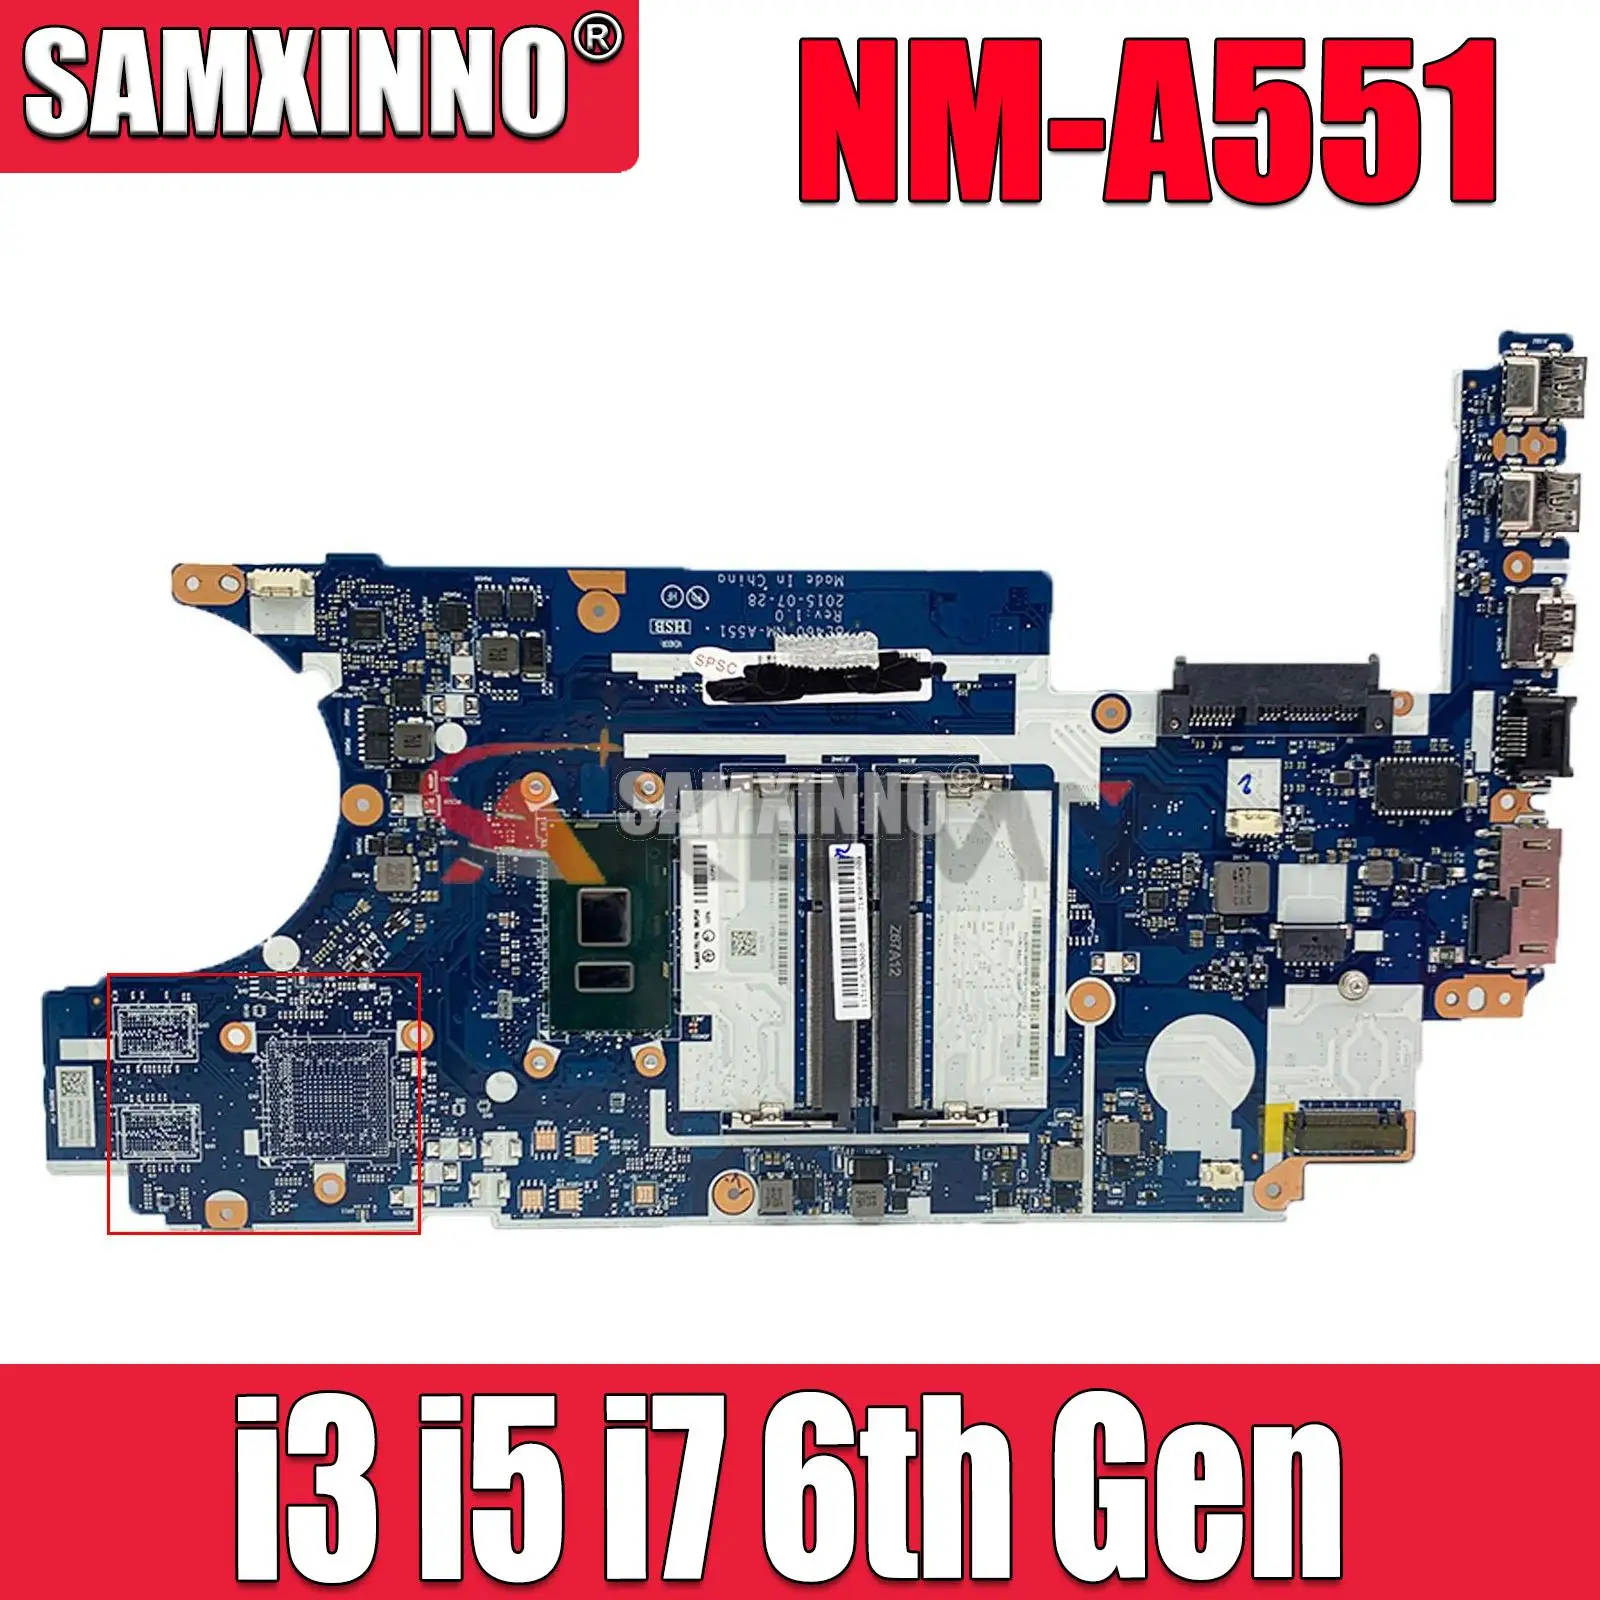 

BE460 NM-A551 Motherboard For Lenovo ThinkPad E460 Laptop Motherboard with i3 i5 i7 6th Gen CPU UAM 100% Test Work